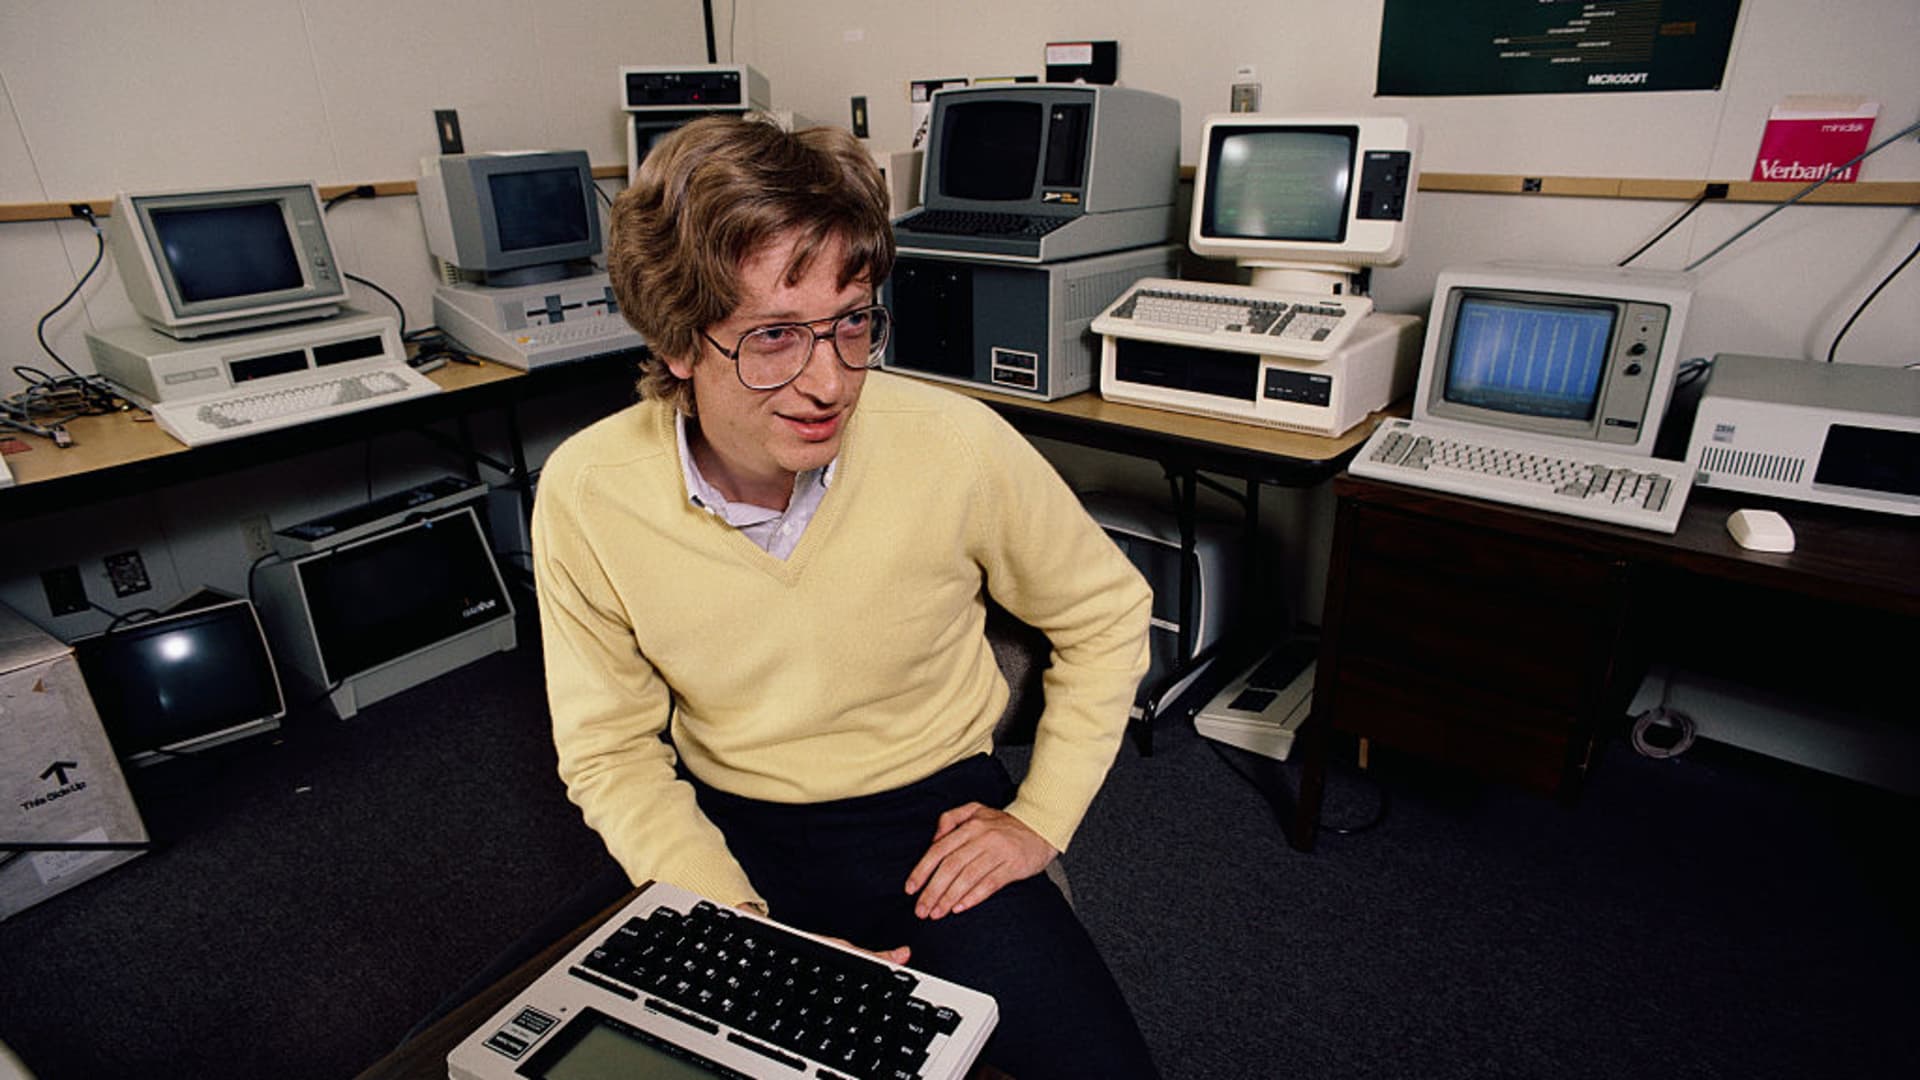 There are 9 types of intelligence. Bill Gates says finding yours is key